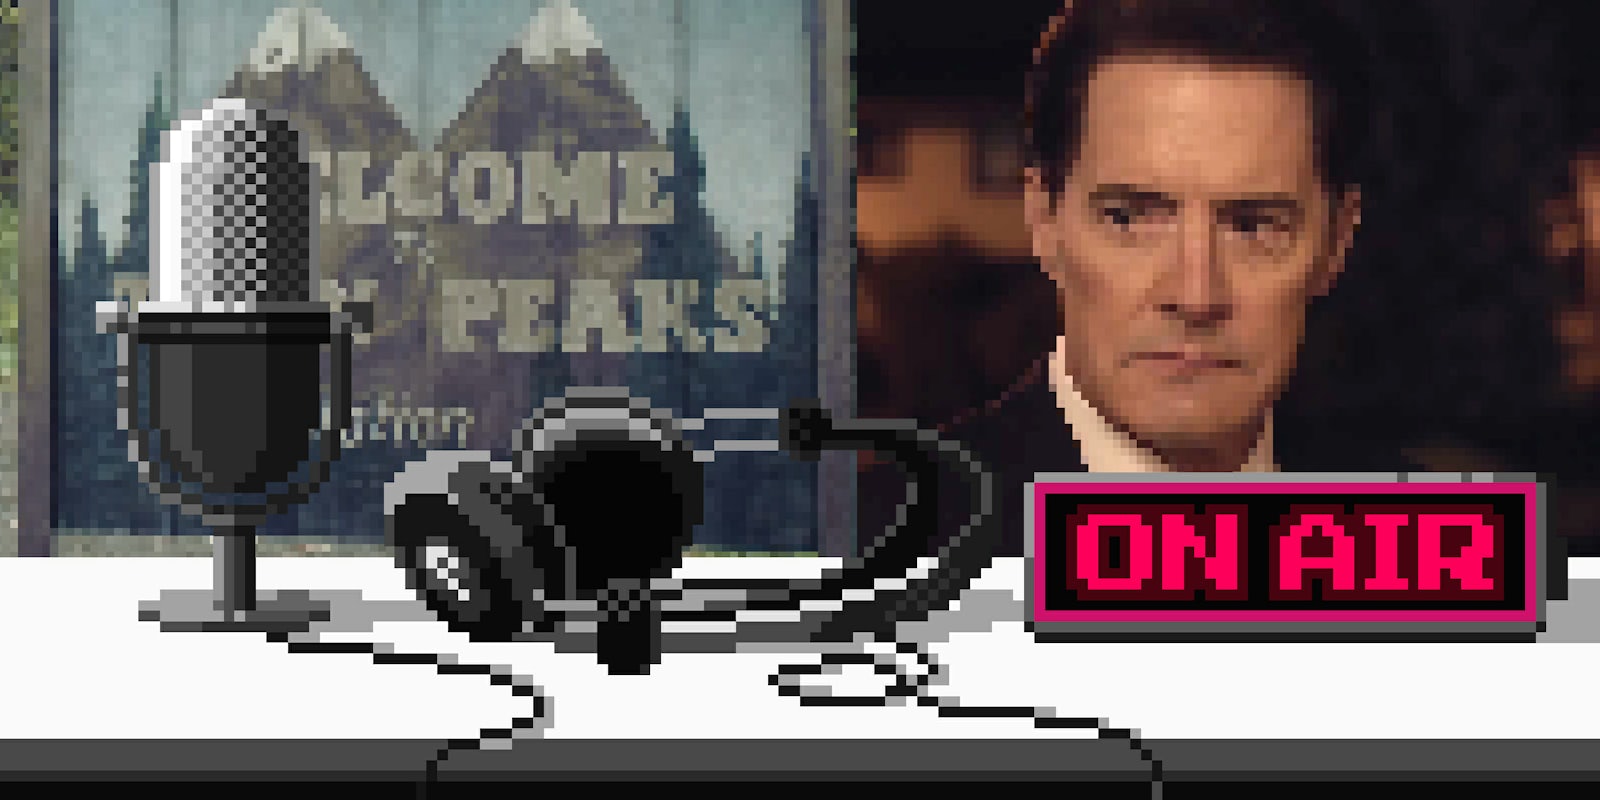 Upstream podcast discusses 'Twin Peaks'